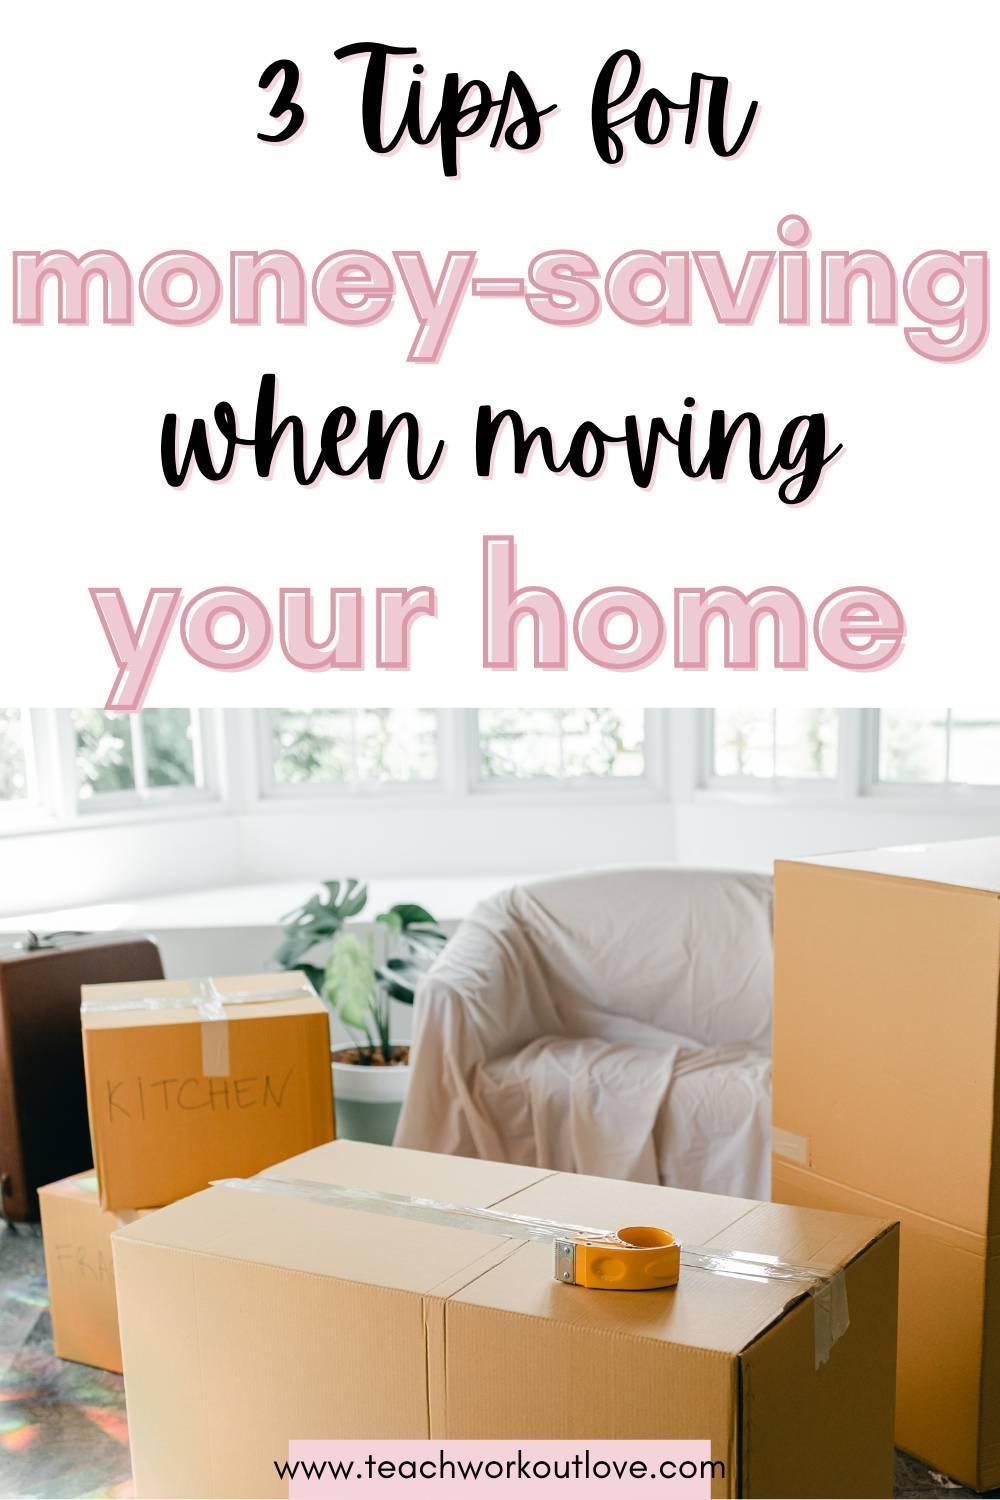 If you're on a tight budget, moving home can be stressful. But fear not, there are several ways to save money on your move, so you can stop worrying about your finances and start looking forward to your new life.